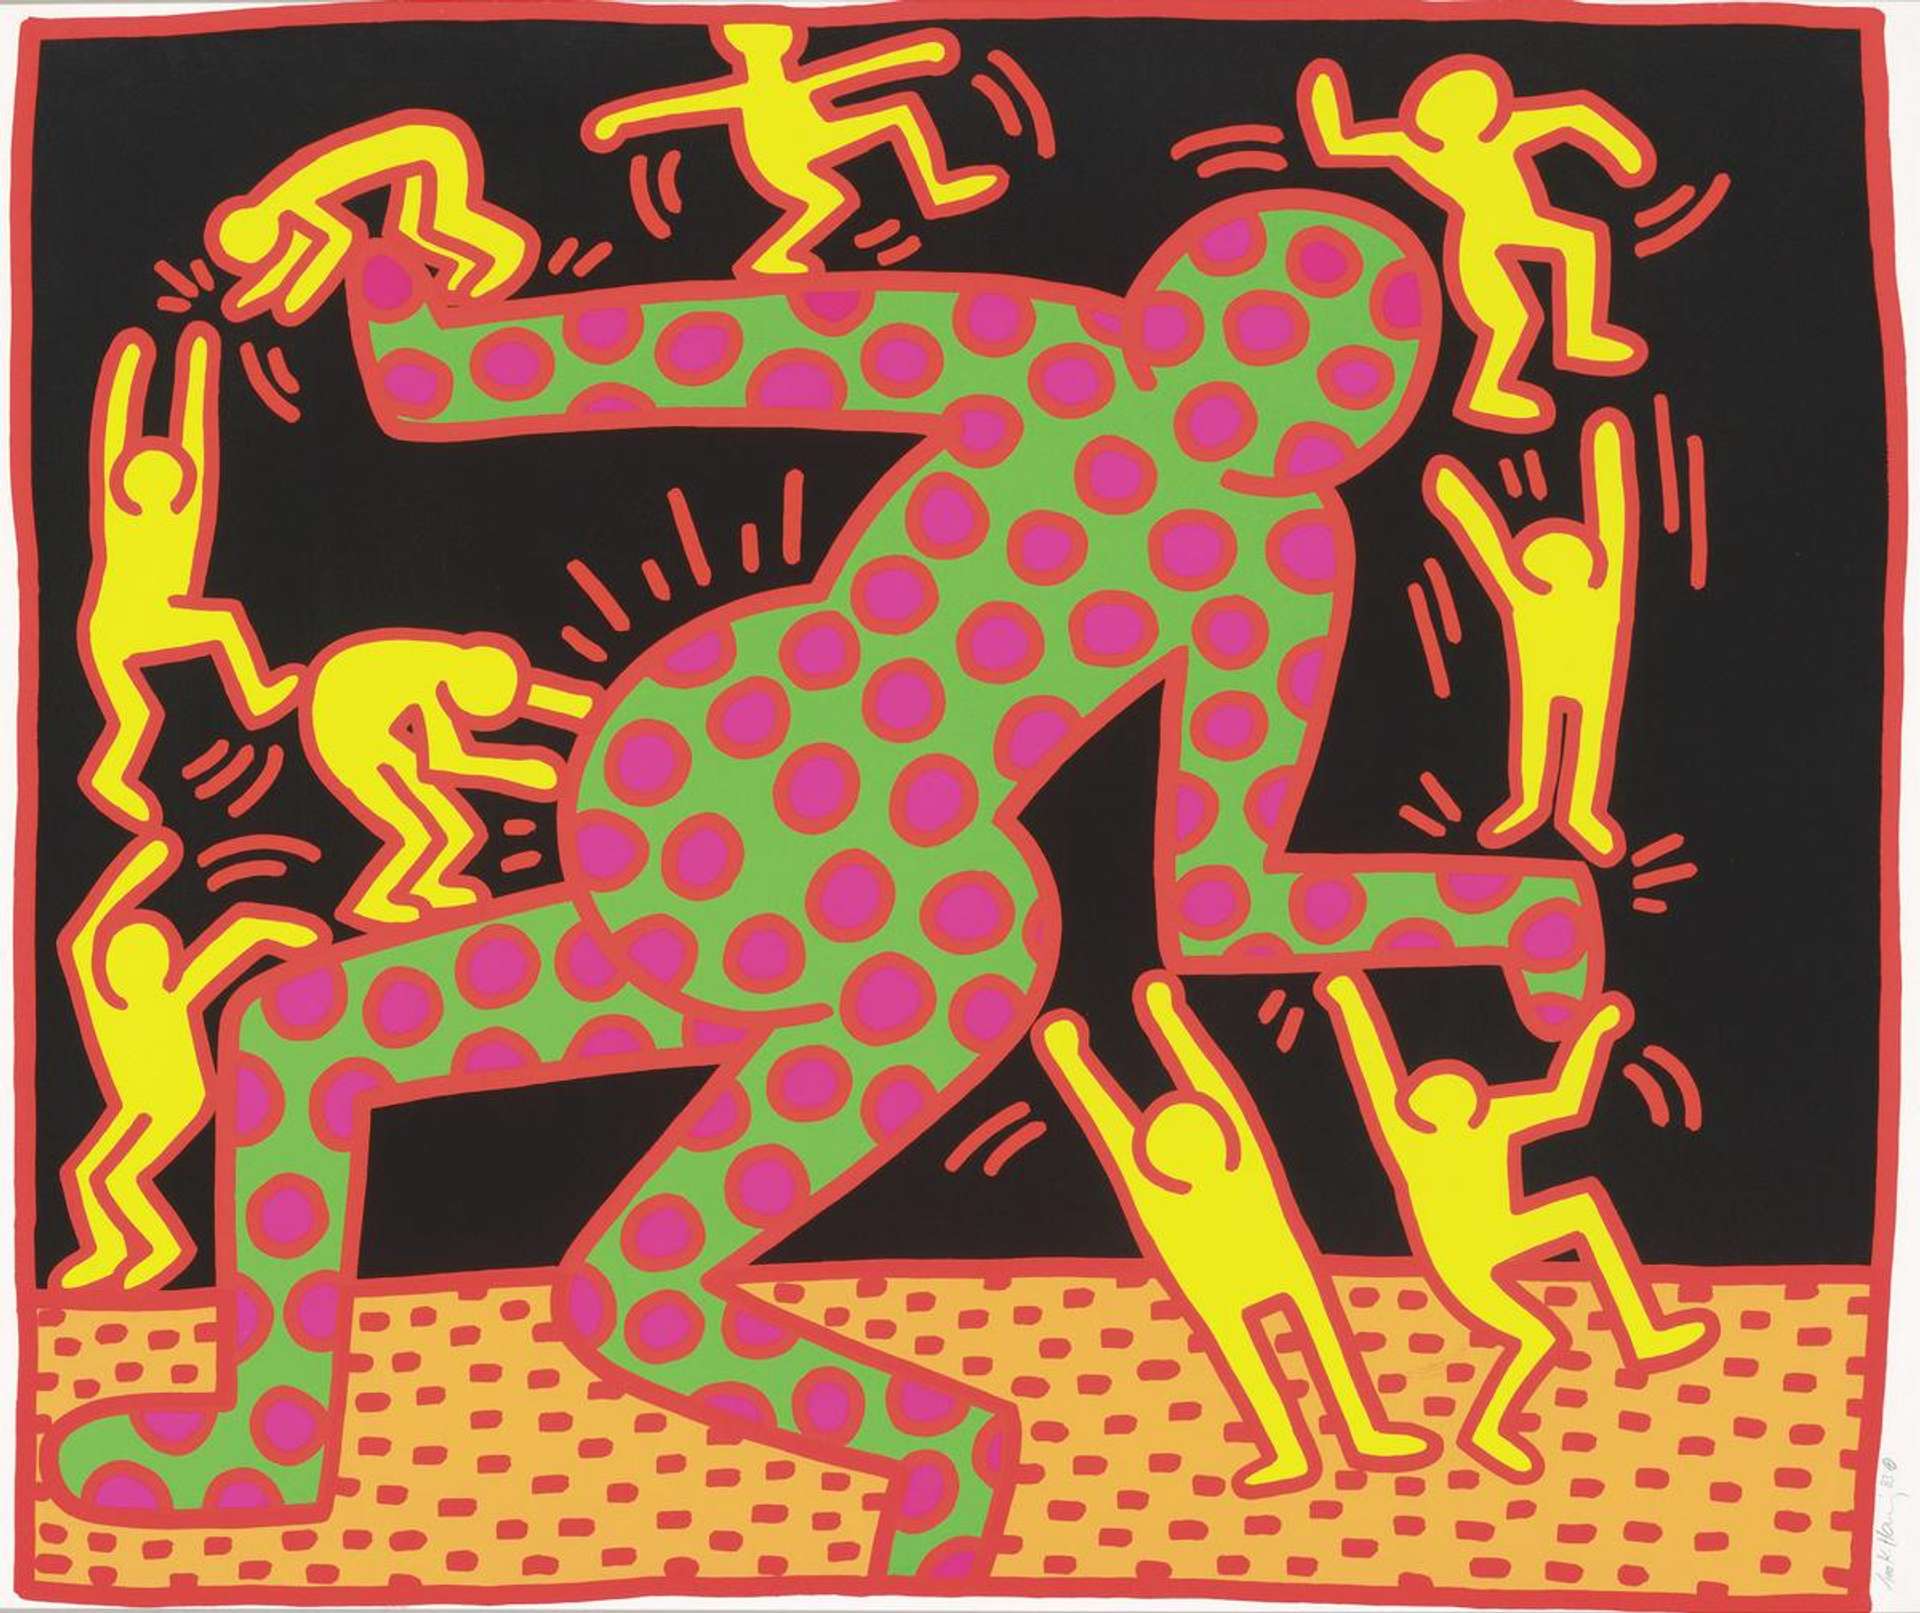 Keith Haring’s Fertility 3. A Pop Art screenprint of a green pregnant figure with pink polka dots with yellow figures jumping around and on her.